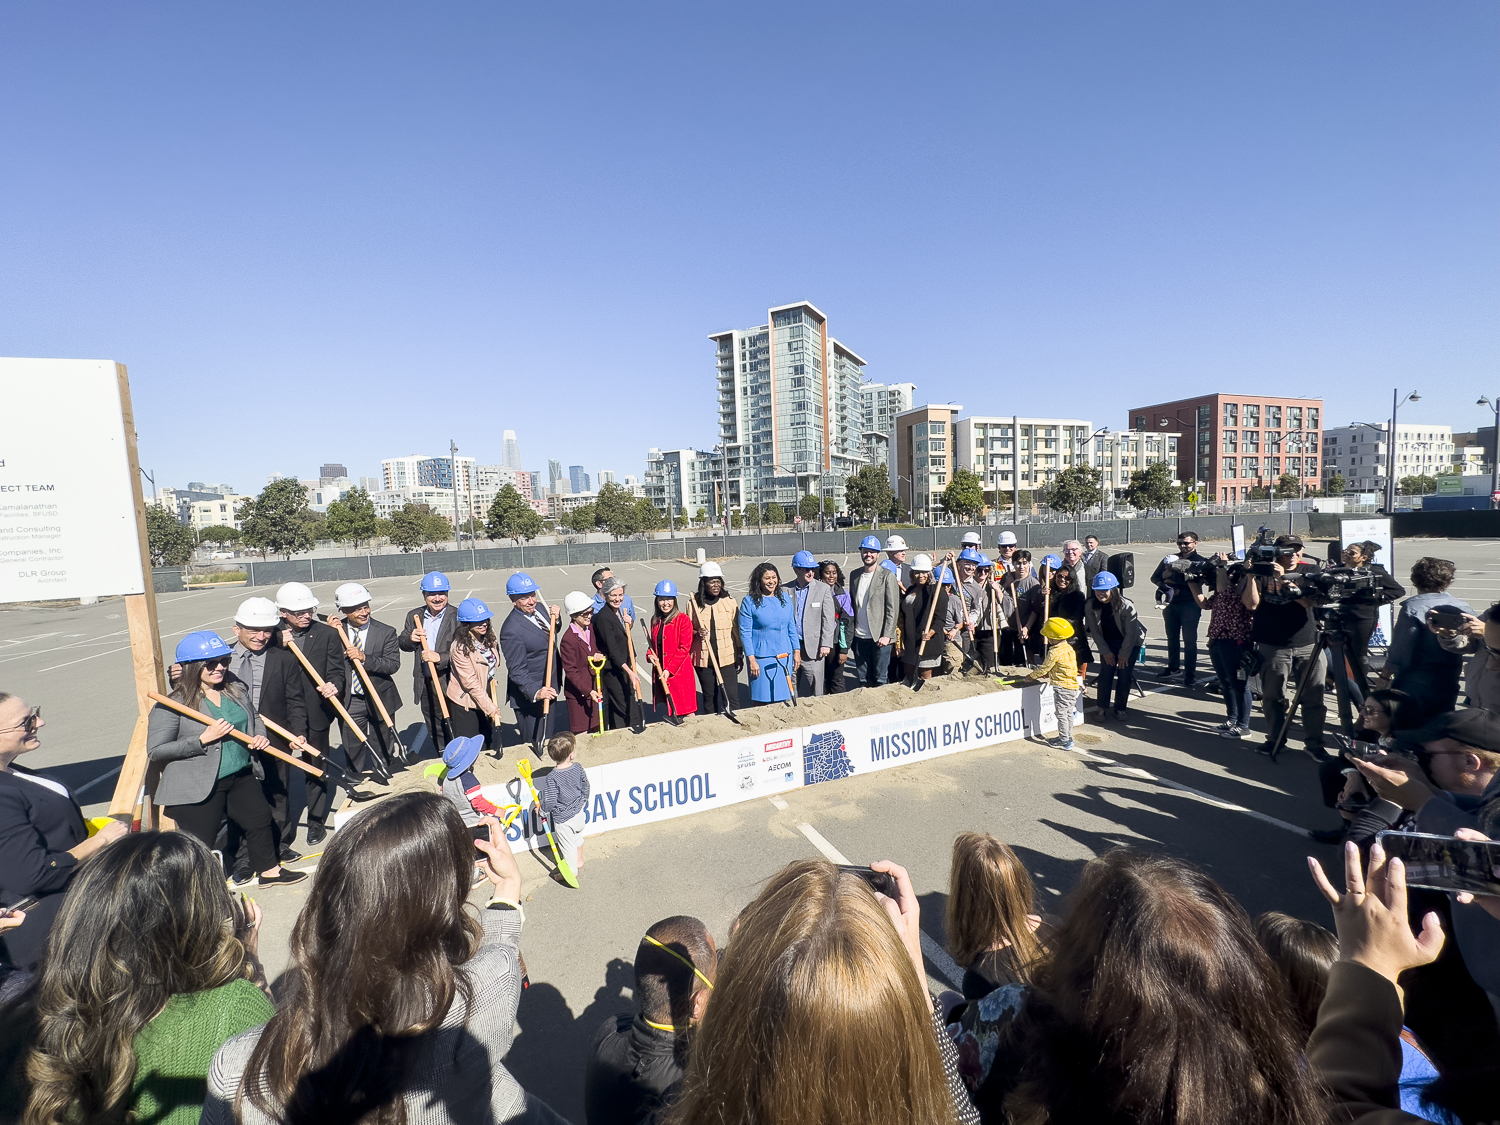 Mission Bay School groundbreaking moment, image by author